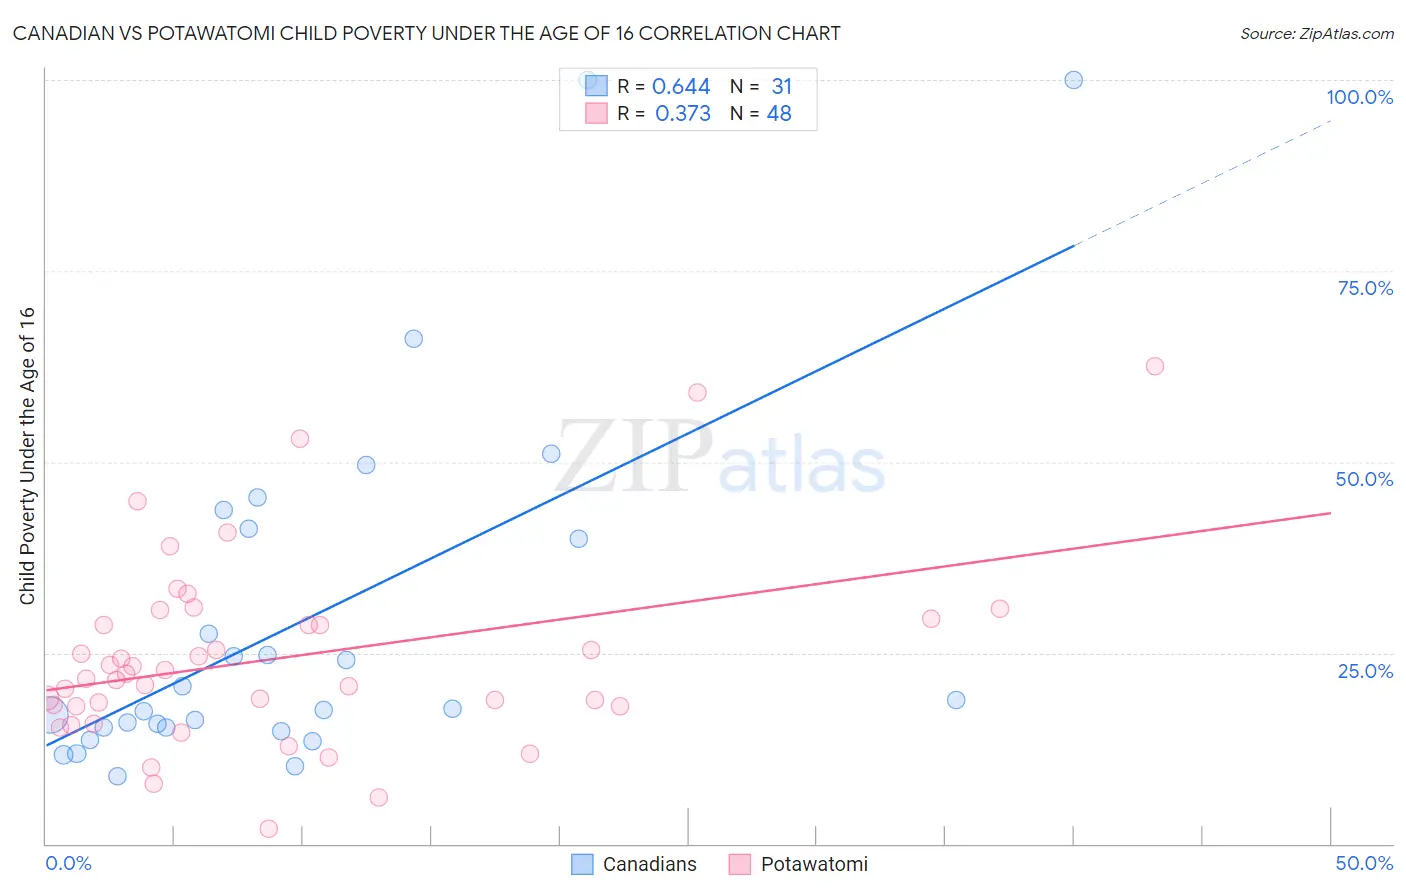 Canadian vs Potawatomi Child Poverty Under the Age of 16